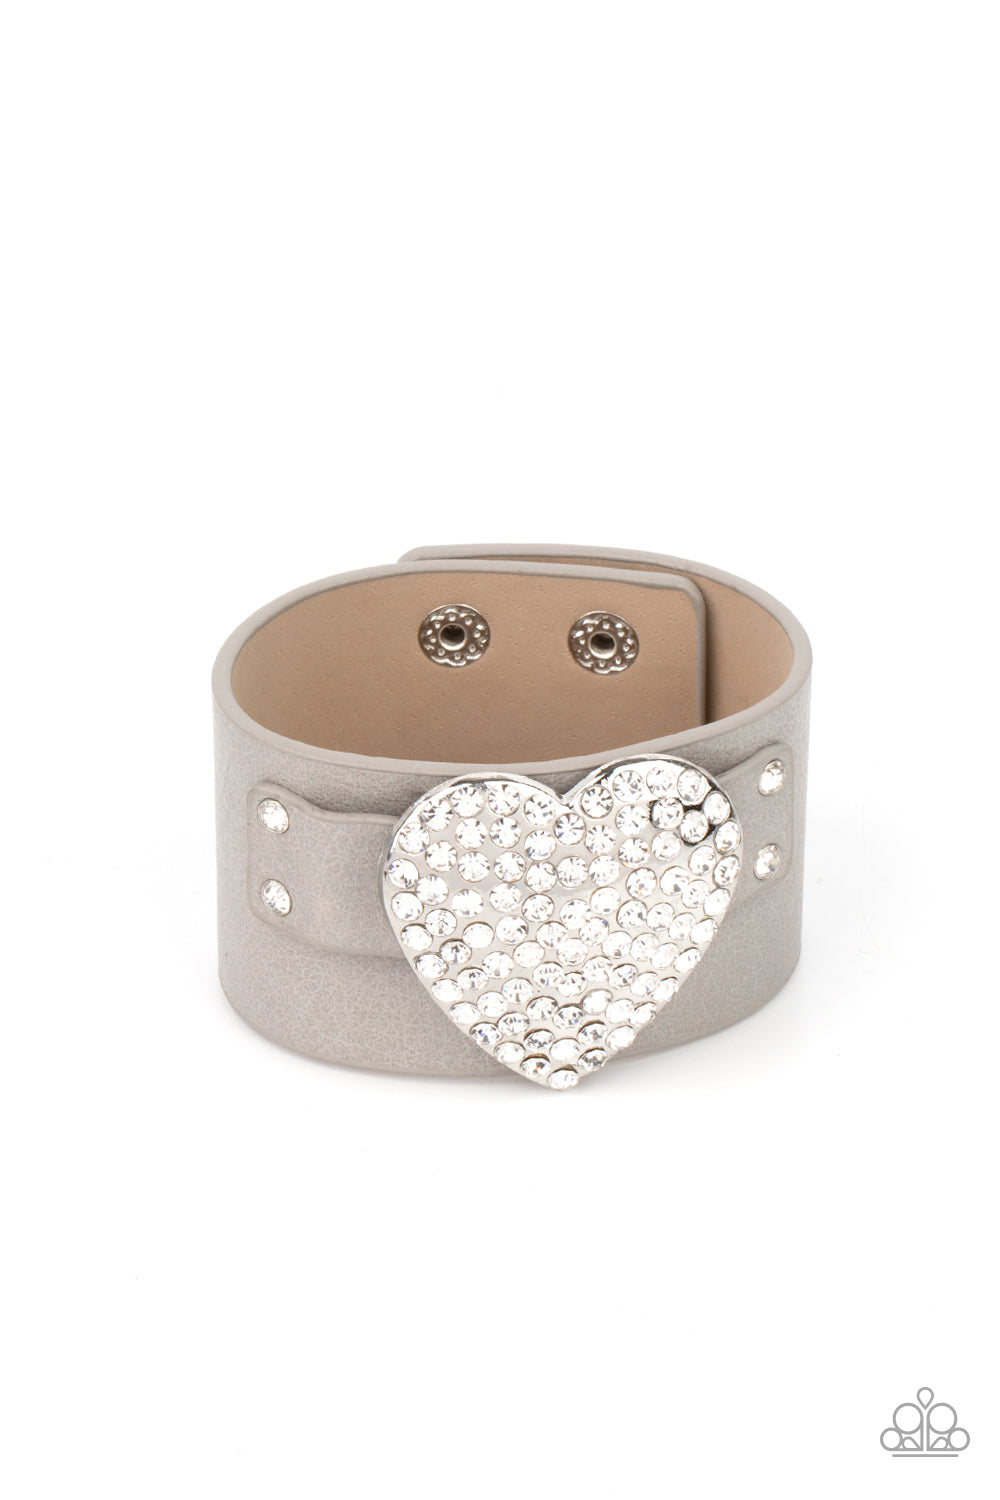 Flauntable Flirt Silver Wrap Bracelet - Paparazzi Accessories  Encrusted in blinding white rhinestones, an oversized silver heart frame is studded in place across the front of a gray leather band, creating a flirtatious centerpiece around the wrist. Features an adjustable snap closure.  All Paparazzi Accessories are lead free and nickel free!  Sold as one individual bracelet.